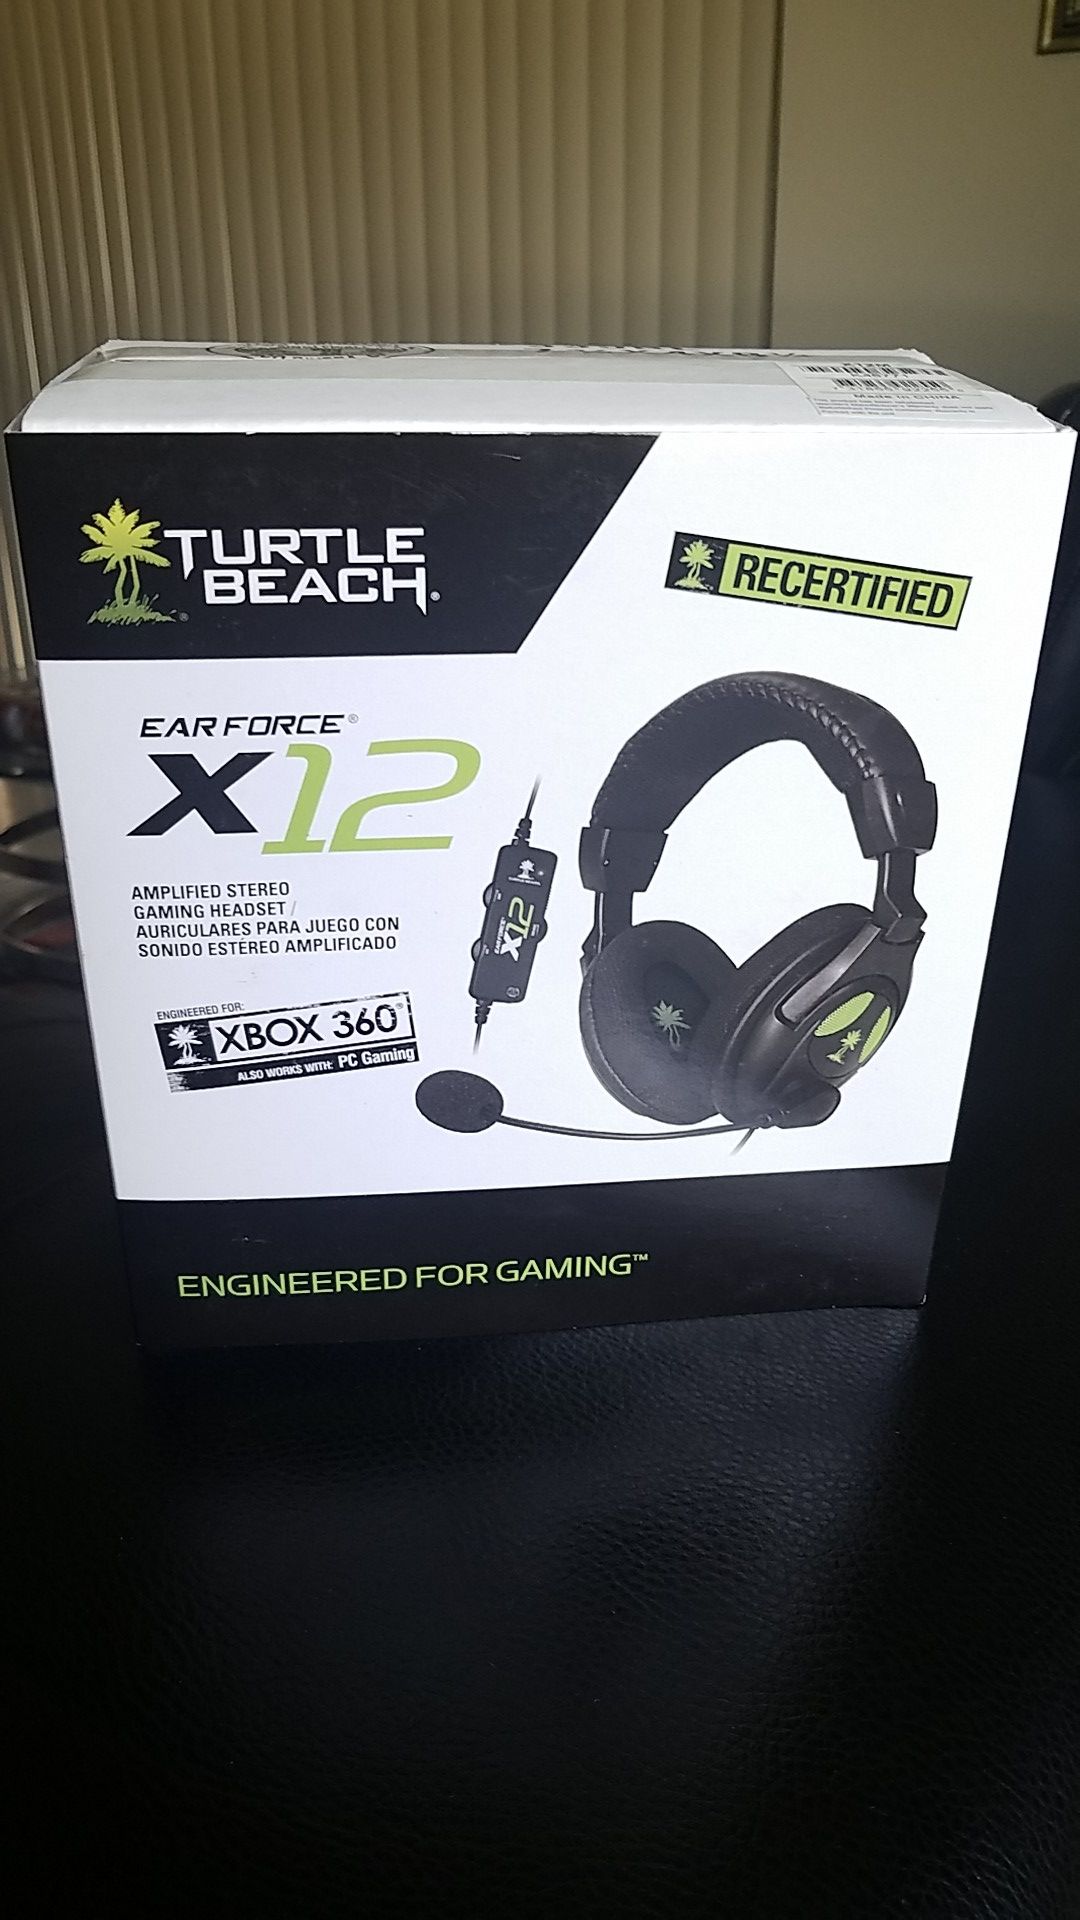 Turtle beach earforce X12 gaming headset for Xbox 360 and PC Gaming